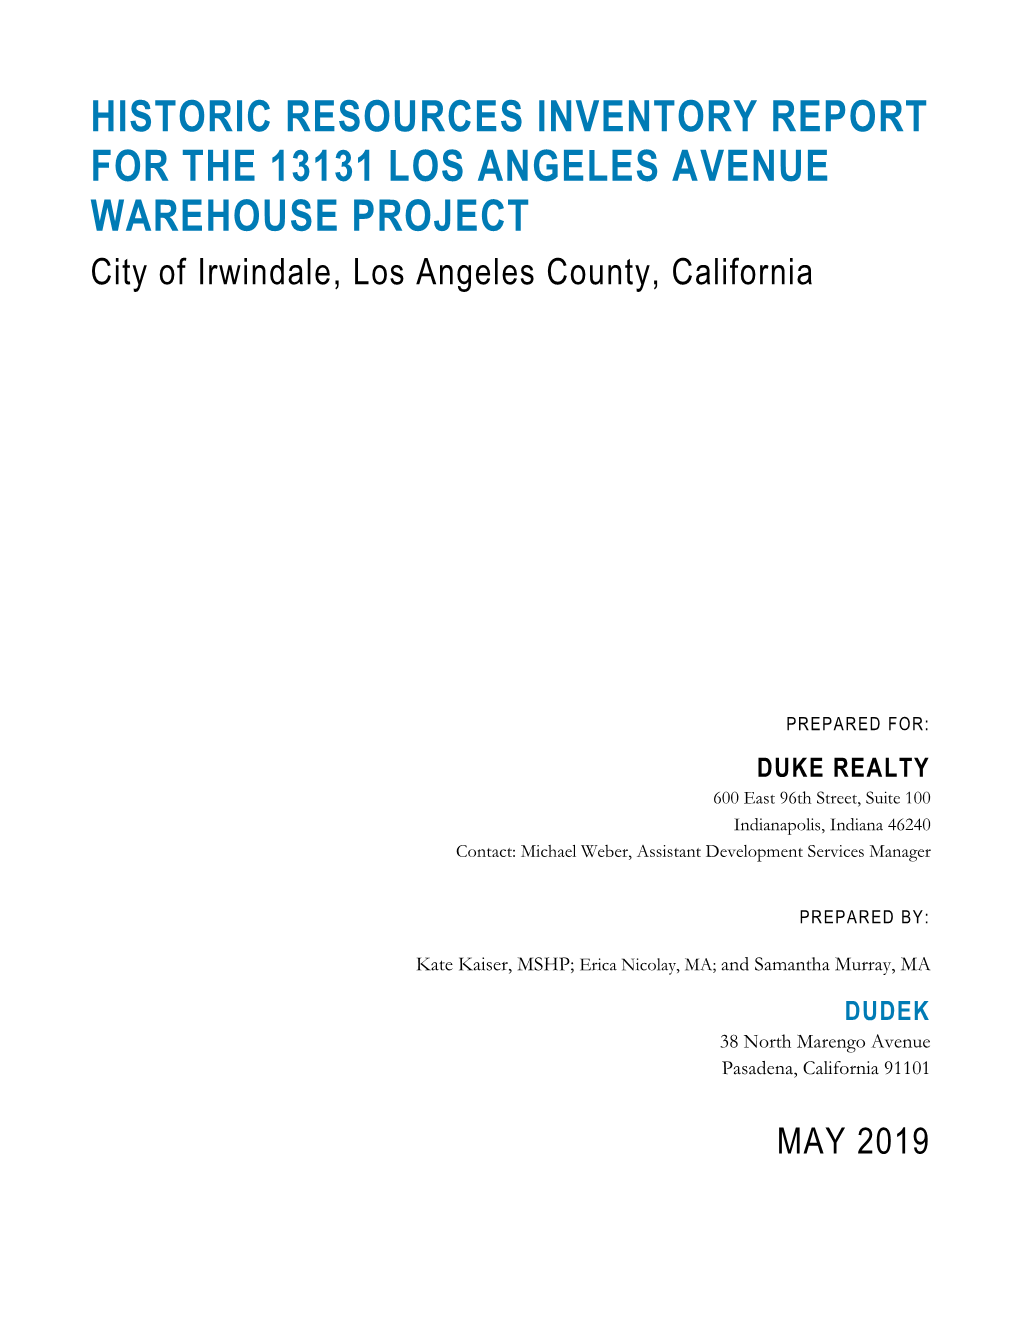 HISTORIC RESOURCES INVENTORY REPORT for the 13131 LOS ANGELES AVENUE WAREHOUSE PROJECT City of Irwindale, Los Angeles County, California